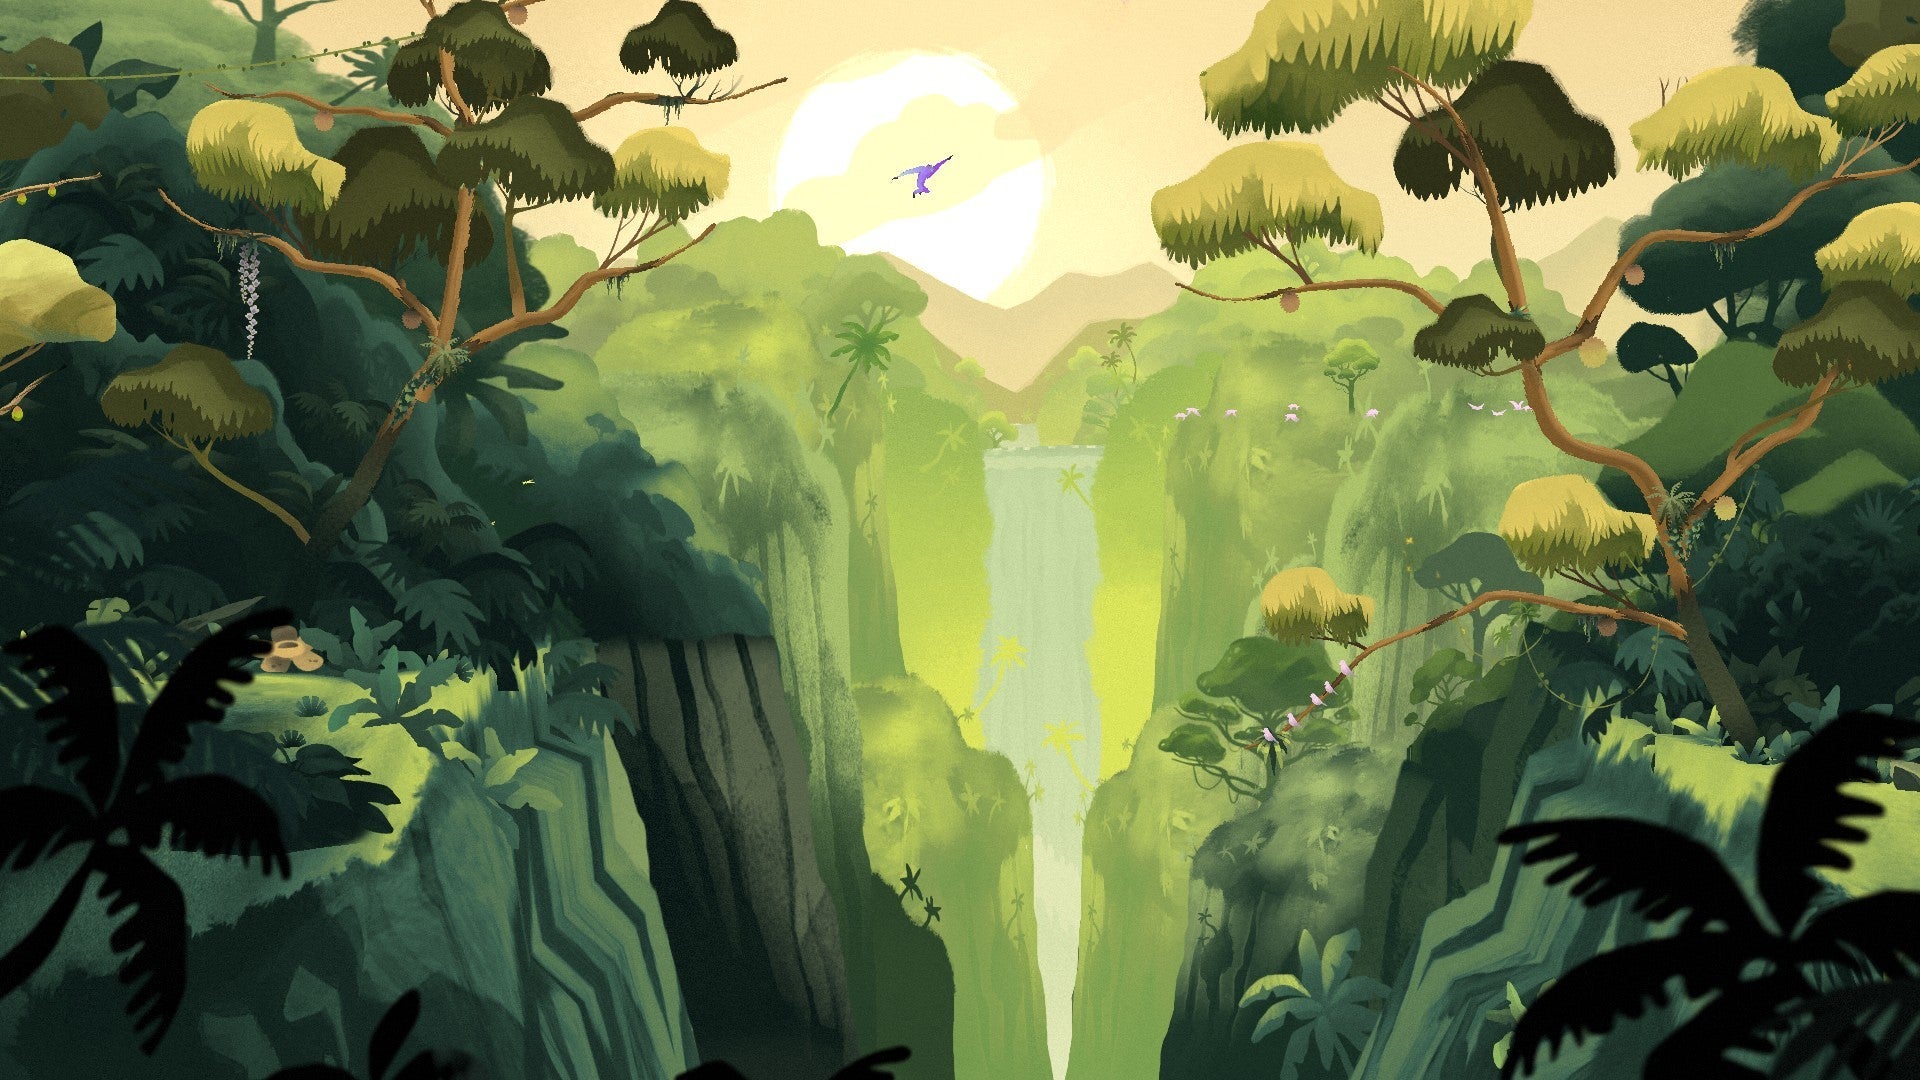 Gibbon: Beyond The Trees is a gorgeous 2D tree-swinging adventure thumbnail